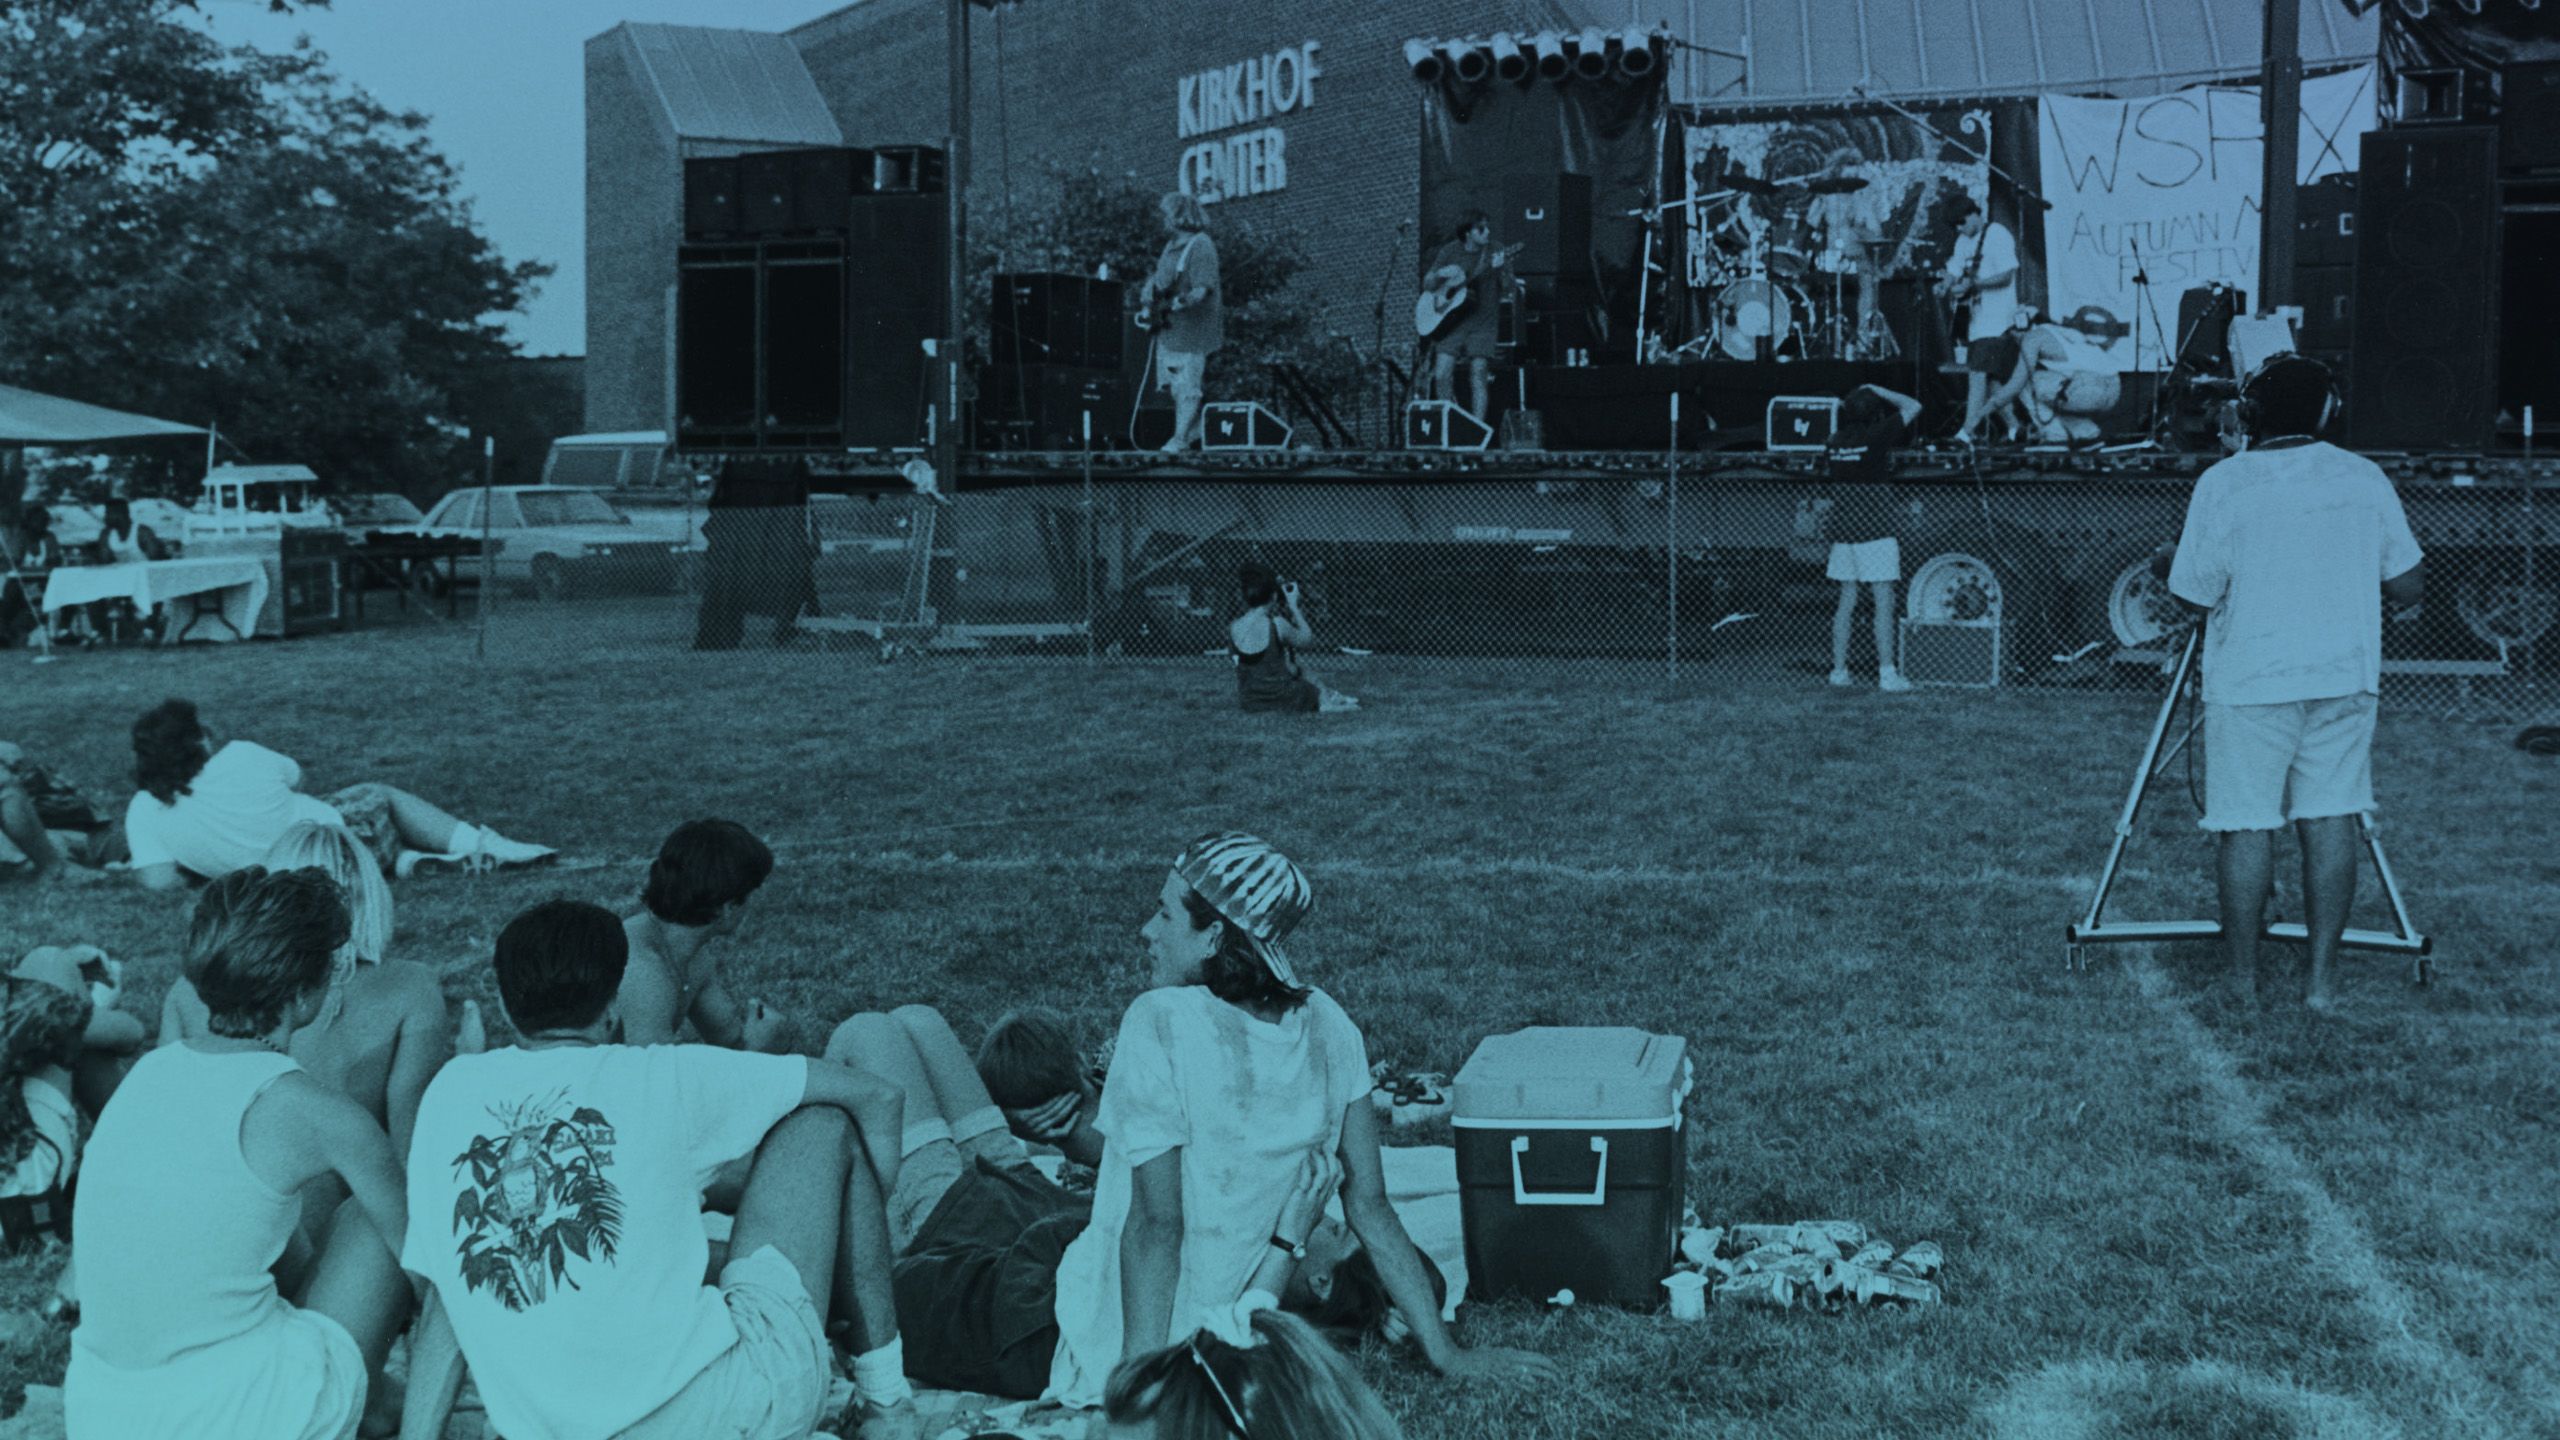 concert in front of Kirkhof Center, circa 1970s, students seated on grass in front